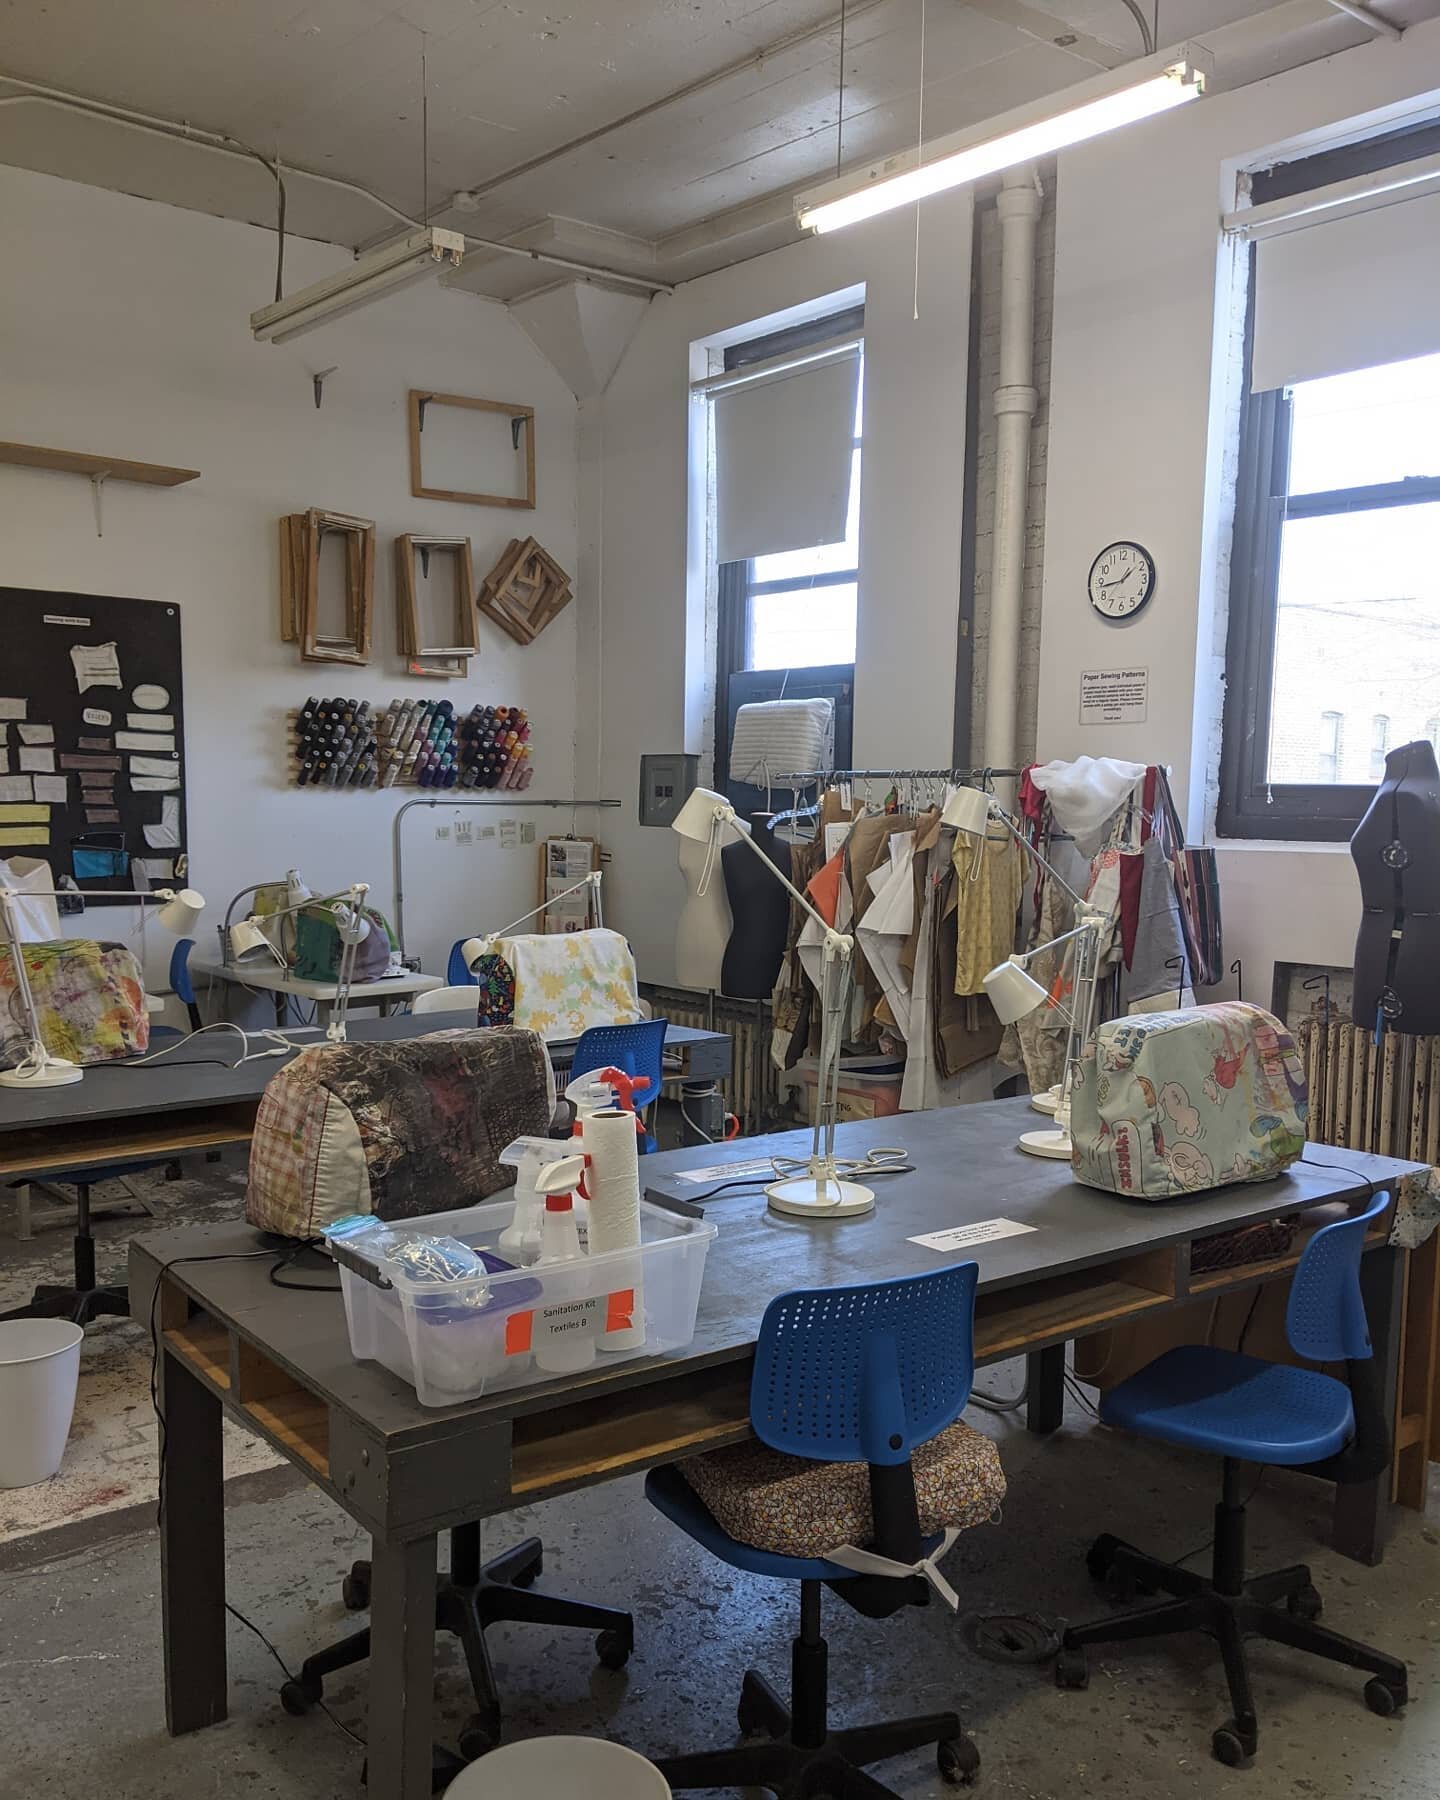 Today I had the pleasure of visiting @textilesatlillstreet for a studio orientation with @natlachall !! 
Storytime: I moved back to Chicago in 2019 after grad school. My first job was a grueling teaching assistantship at a preschool. Those kids were 